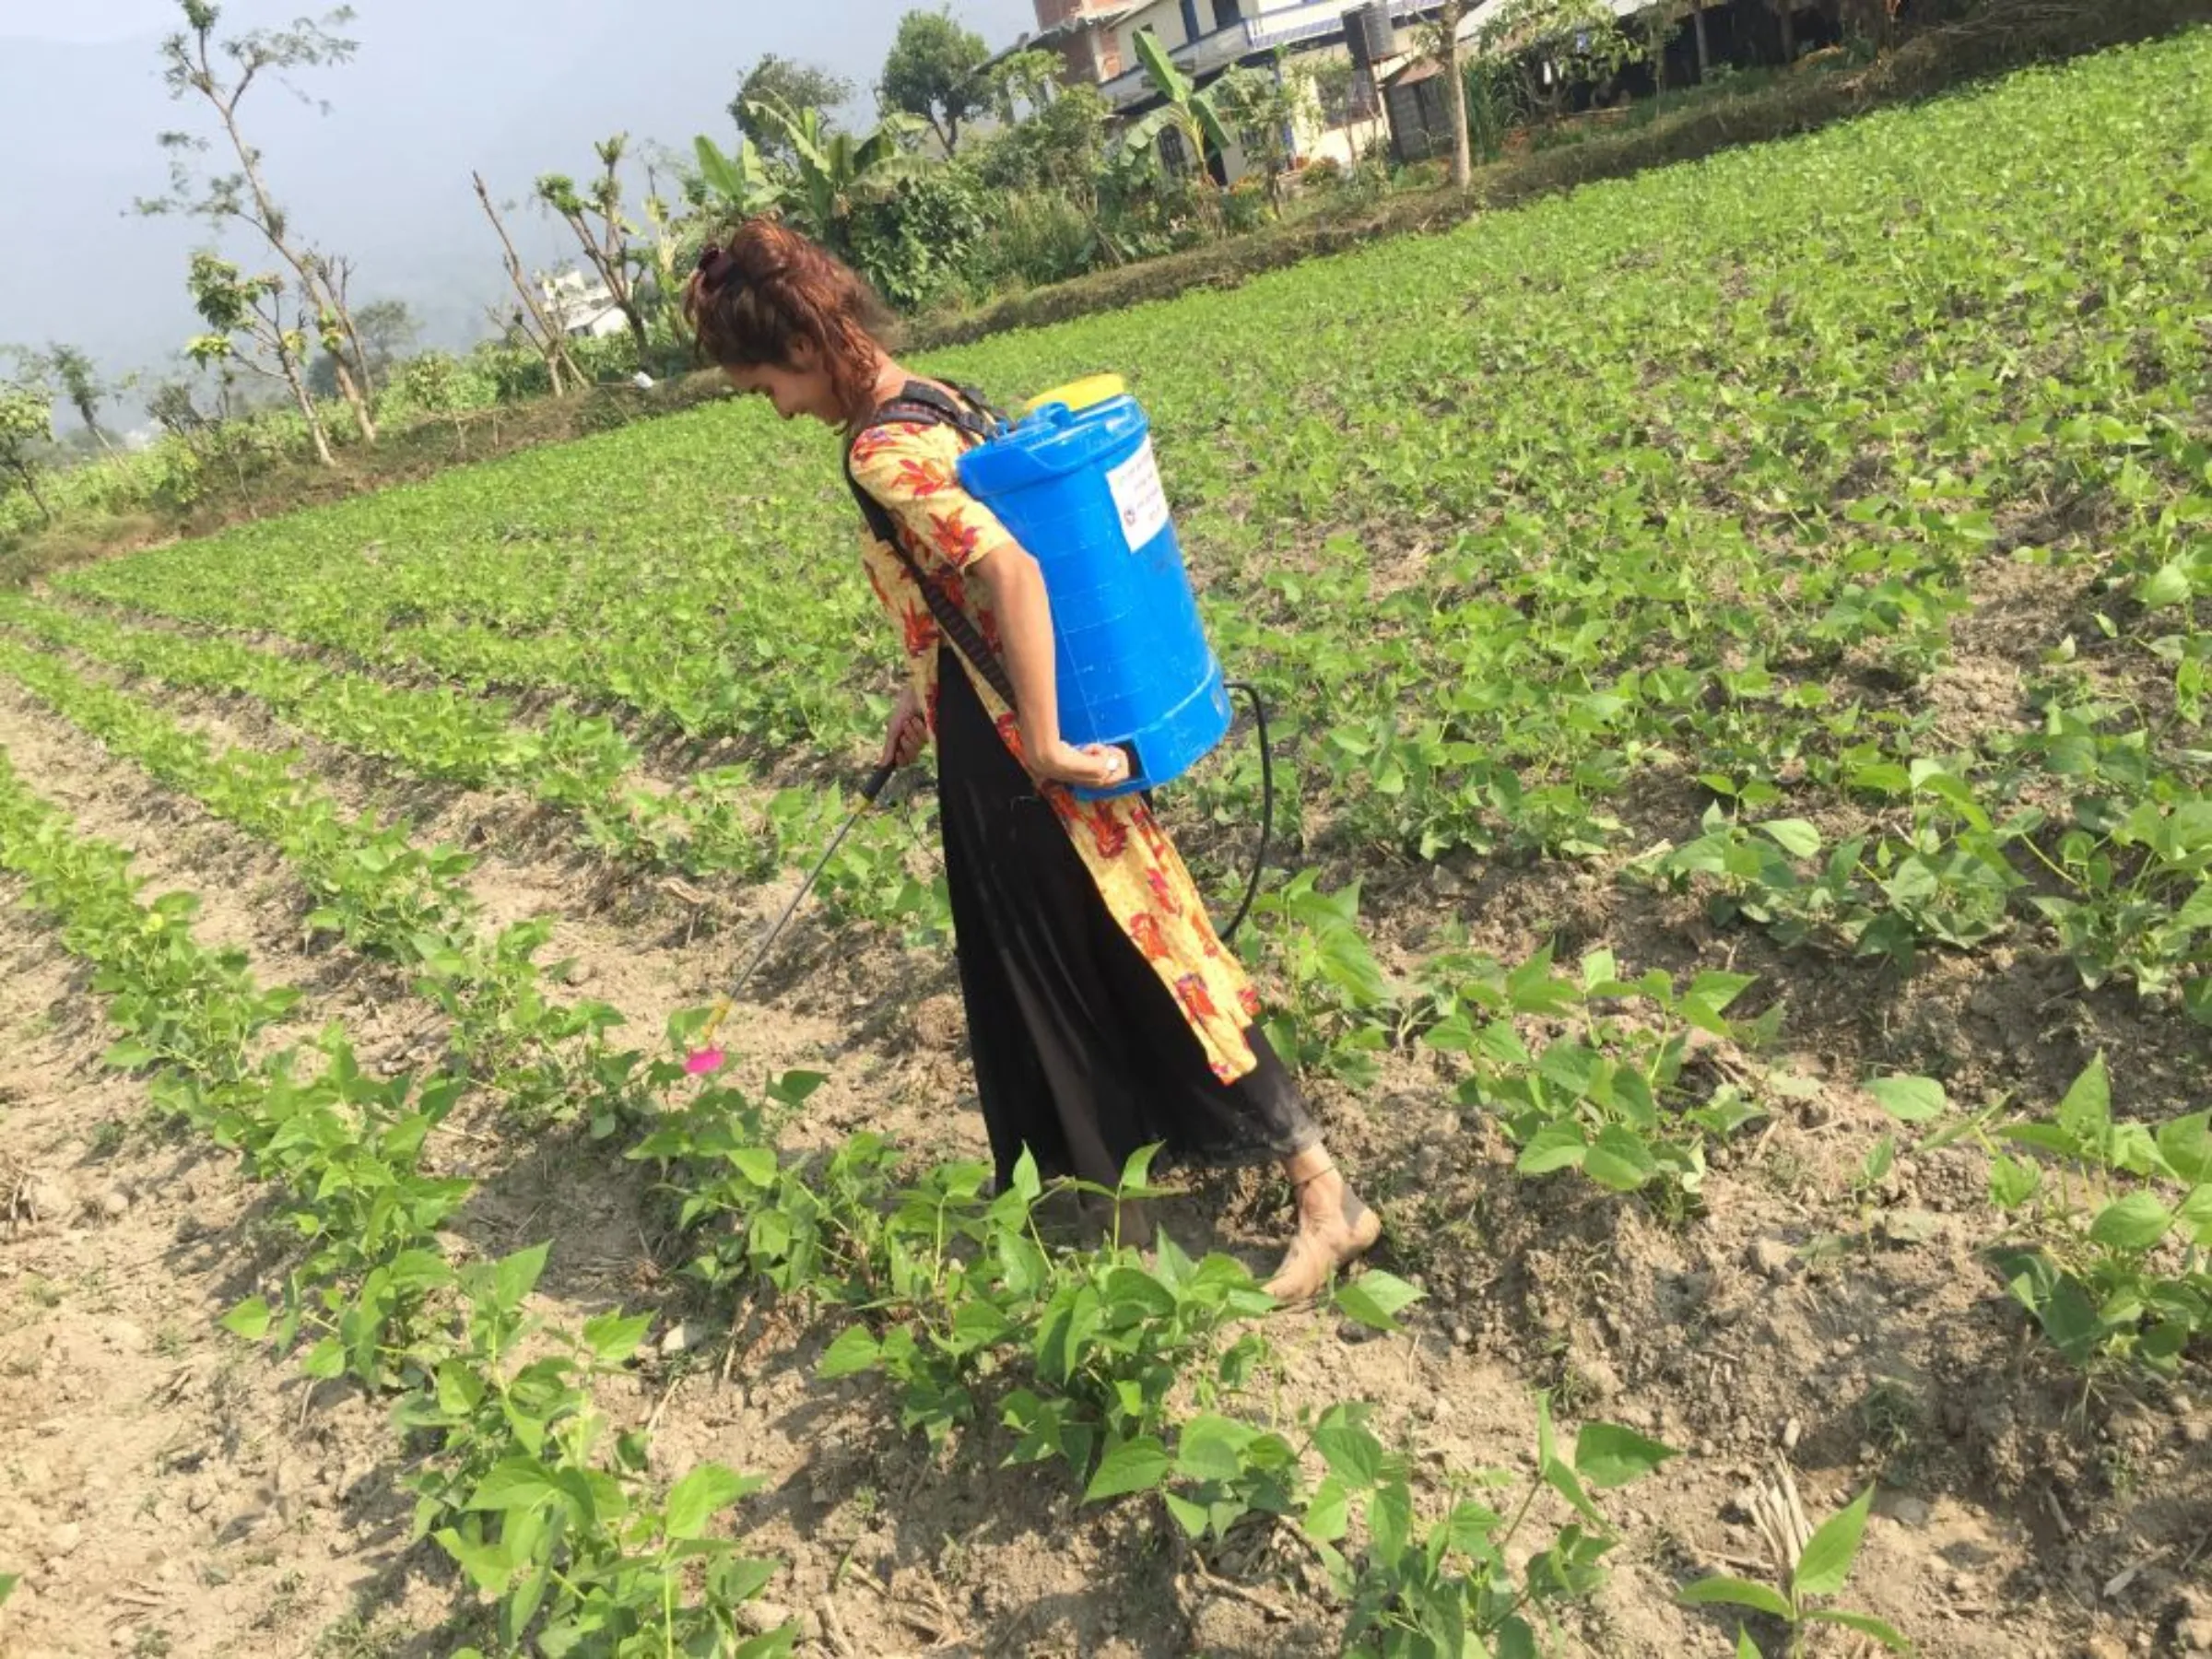 A woman uses pesticides to treat hybrid seeds in Chitwan, Nepal, November 16, 2018